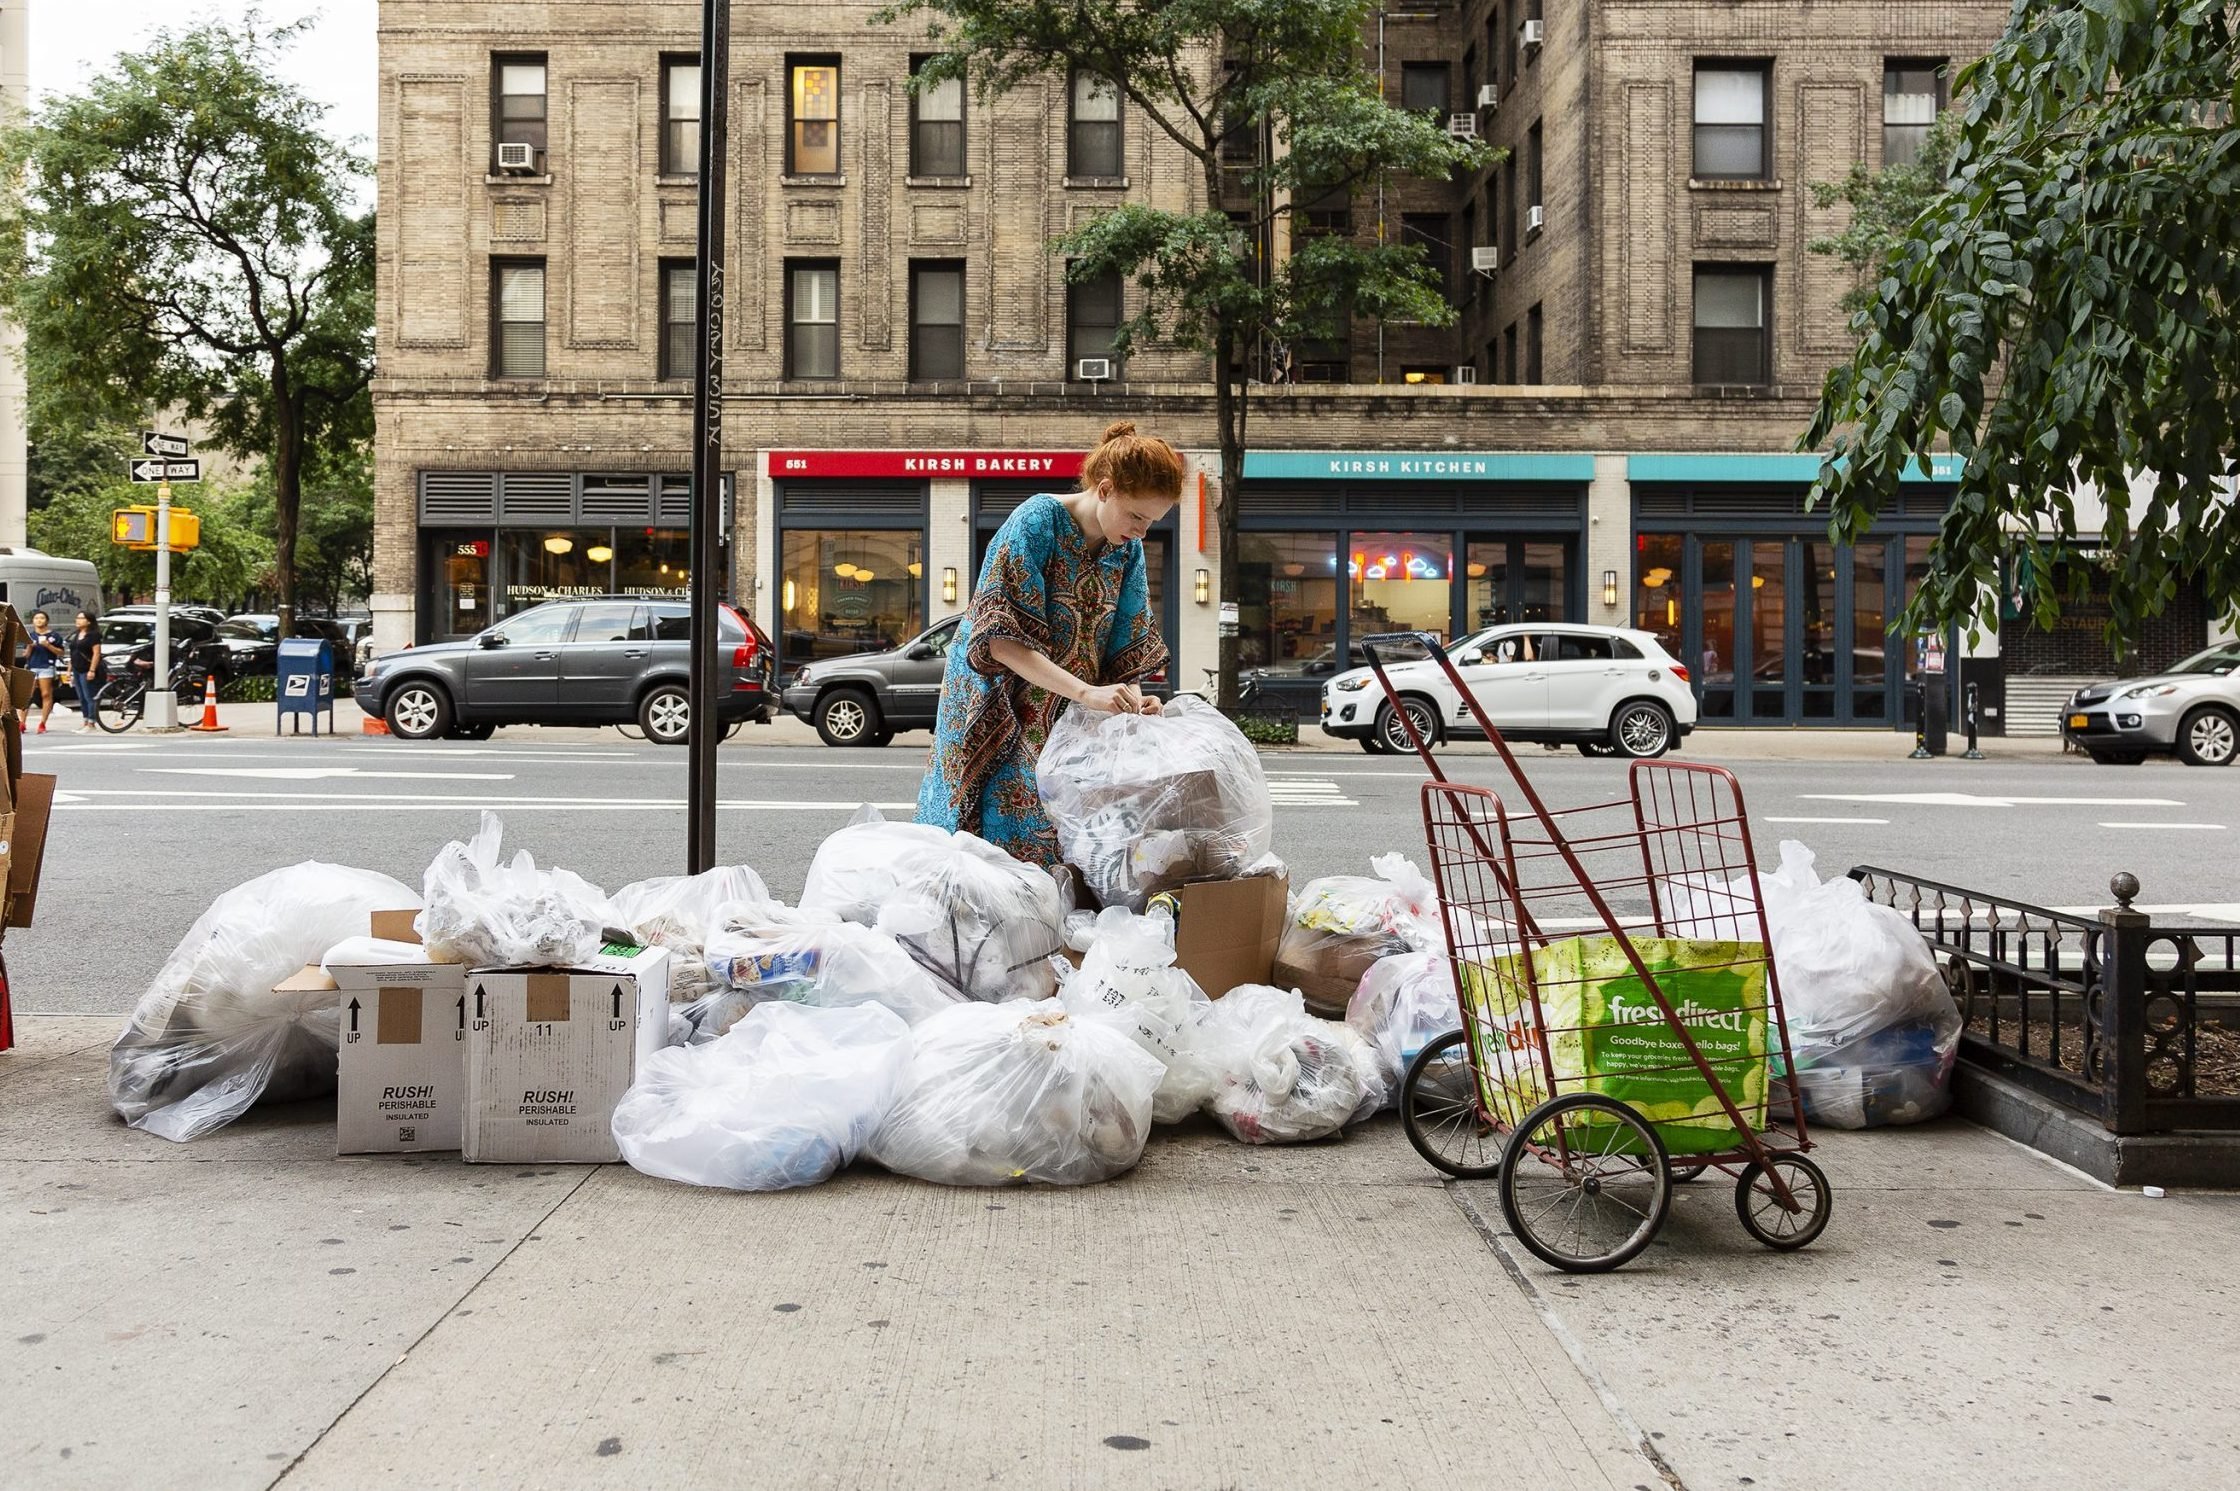 Meet the Activist Who Rummages Through Trash to Save the Planet